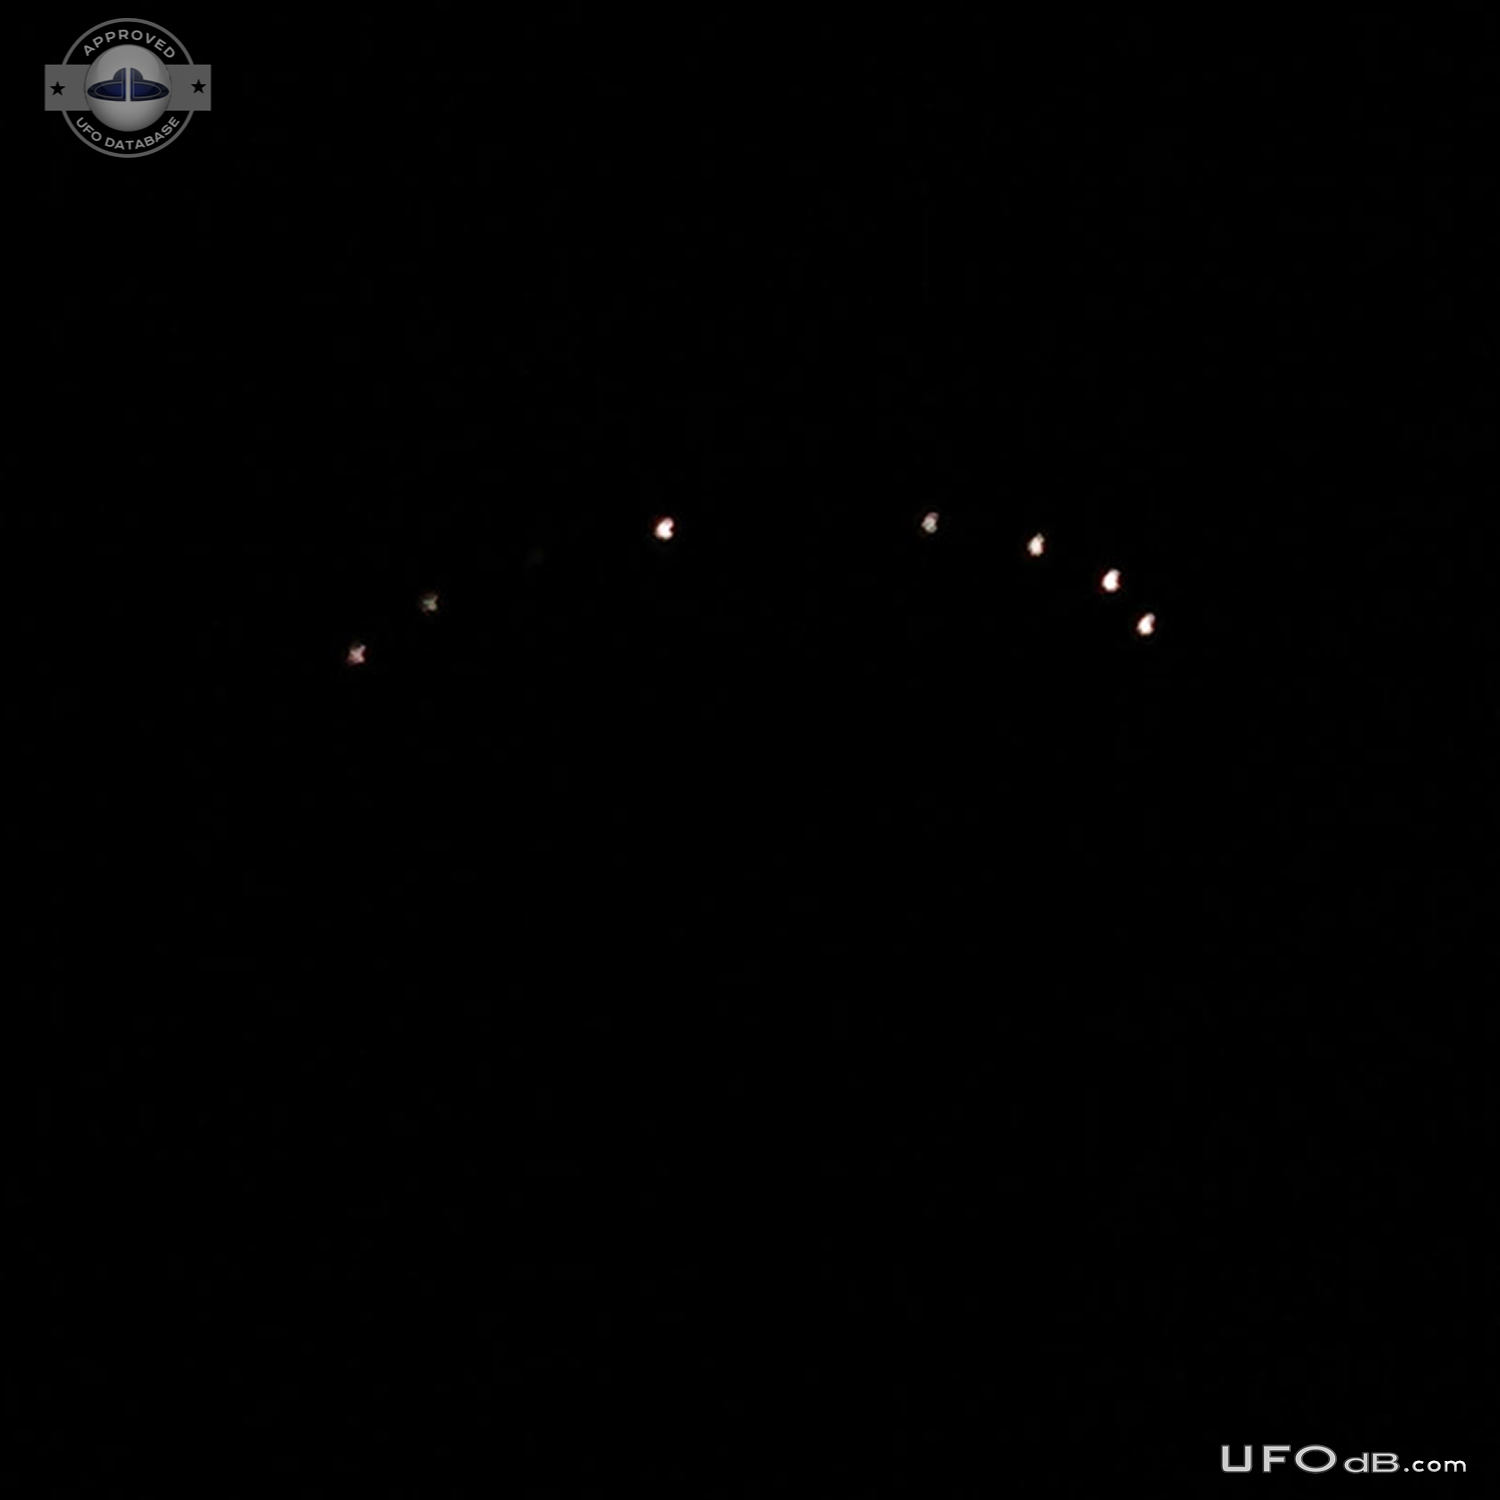 Series of UFOs above the mountains in Portland, Oregon USA 2015 UFO Picture #627-2